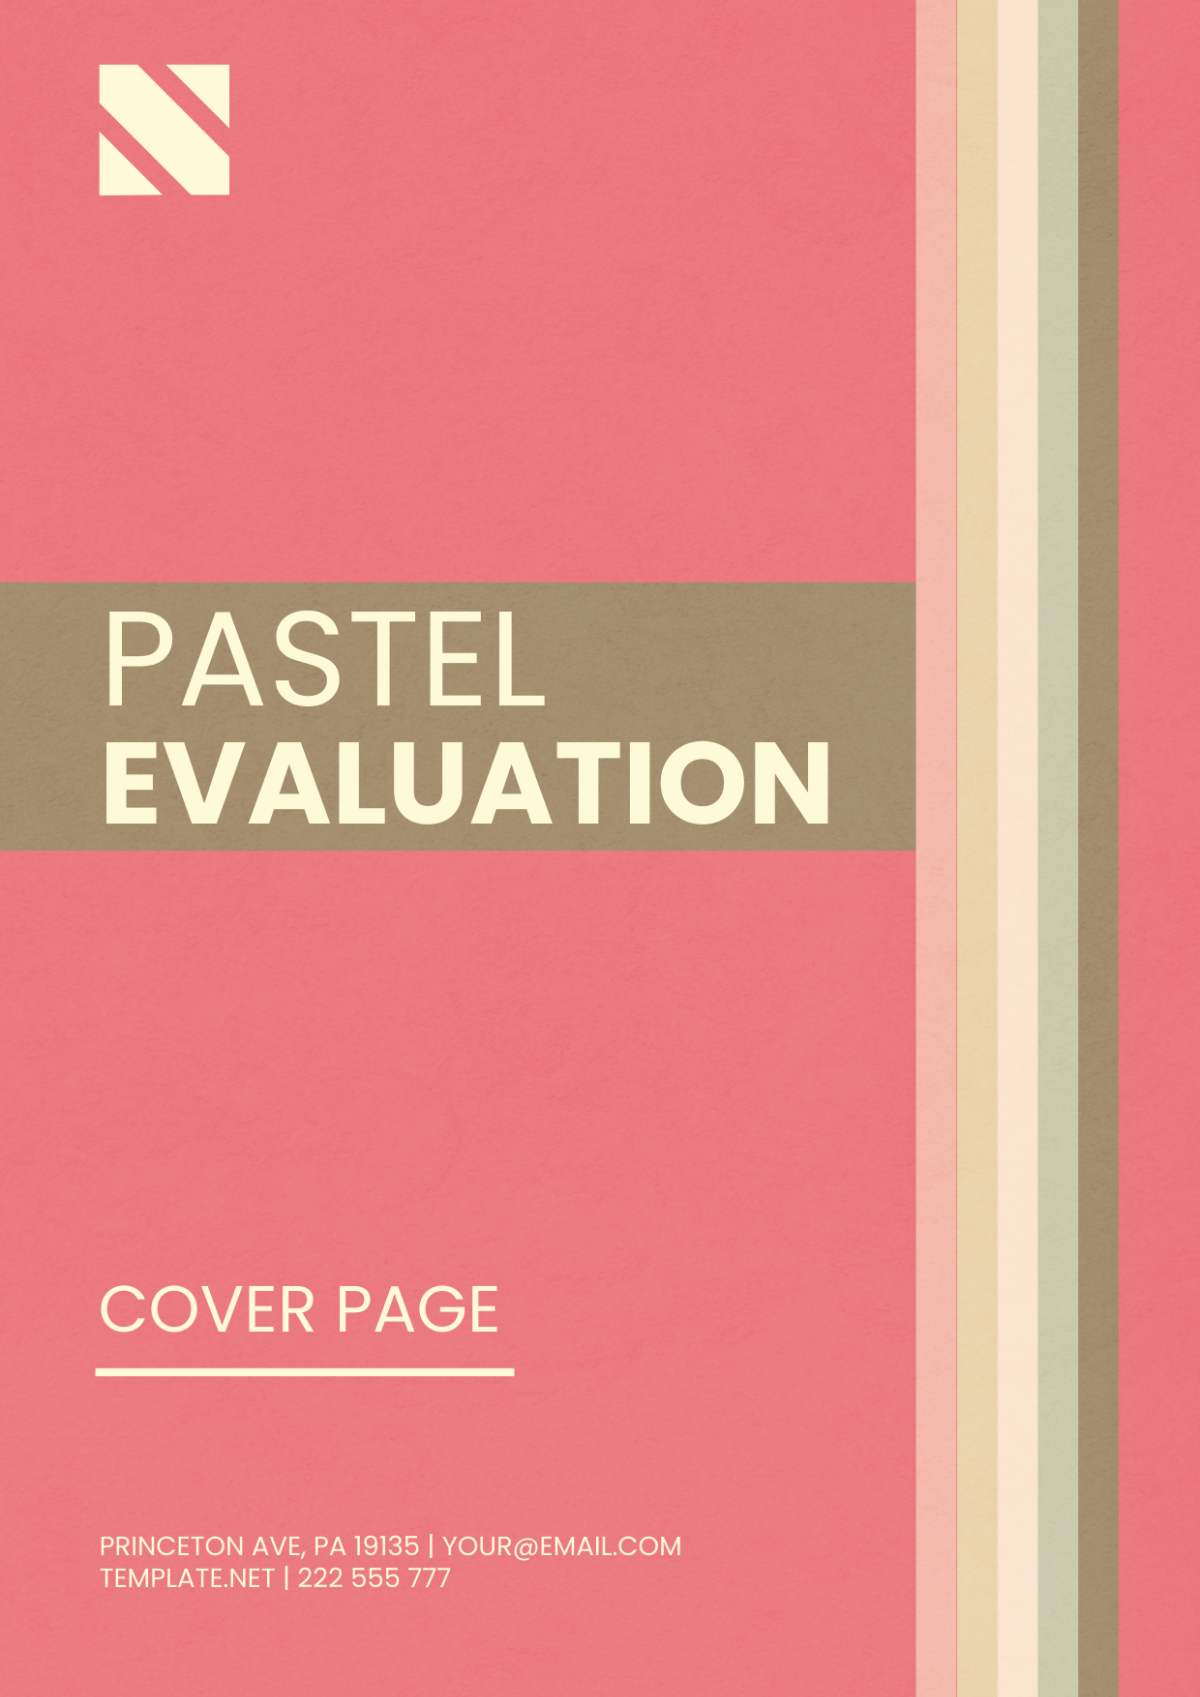 Pastel Evaluation Cover Page